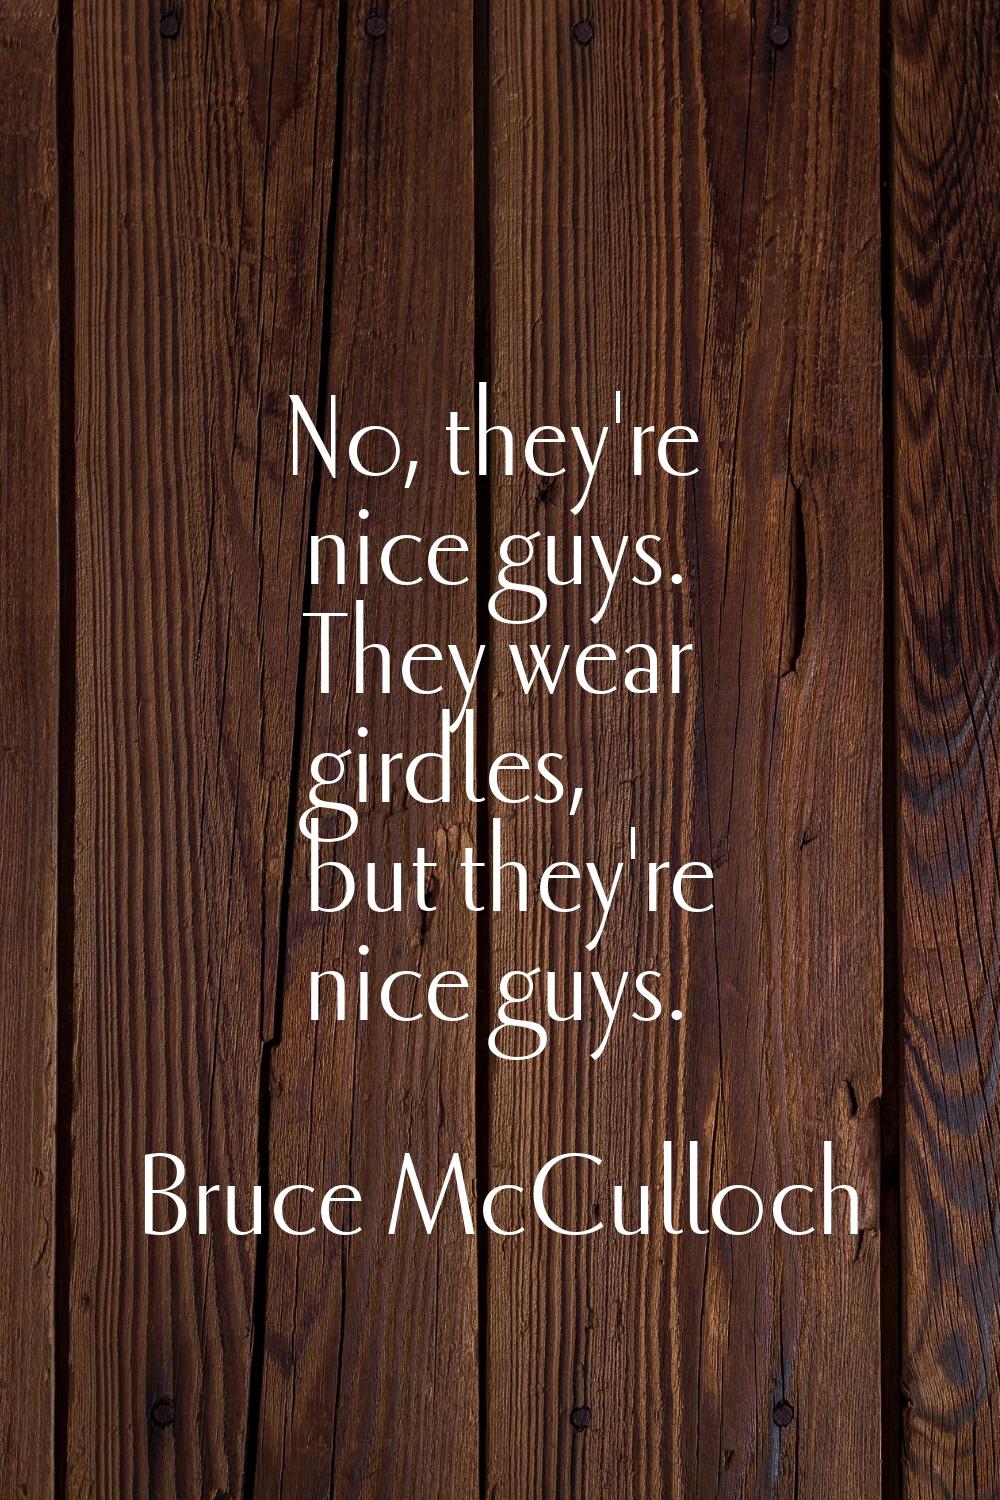 No, they're nice guys. They wear girdles, but they're nice guys.